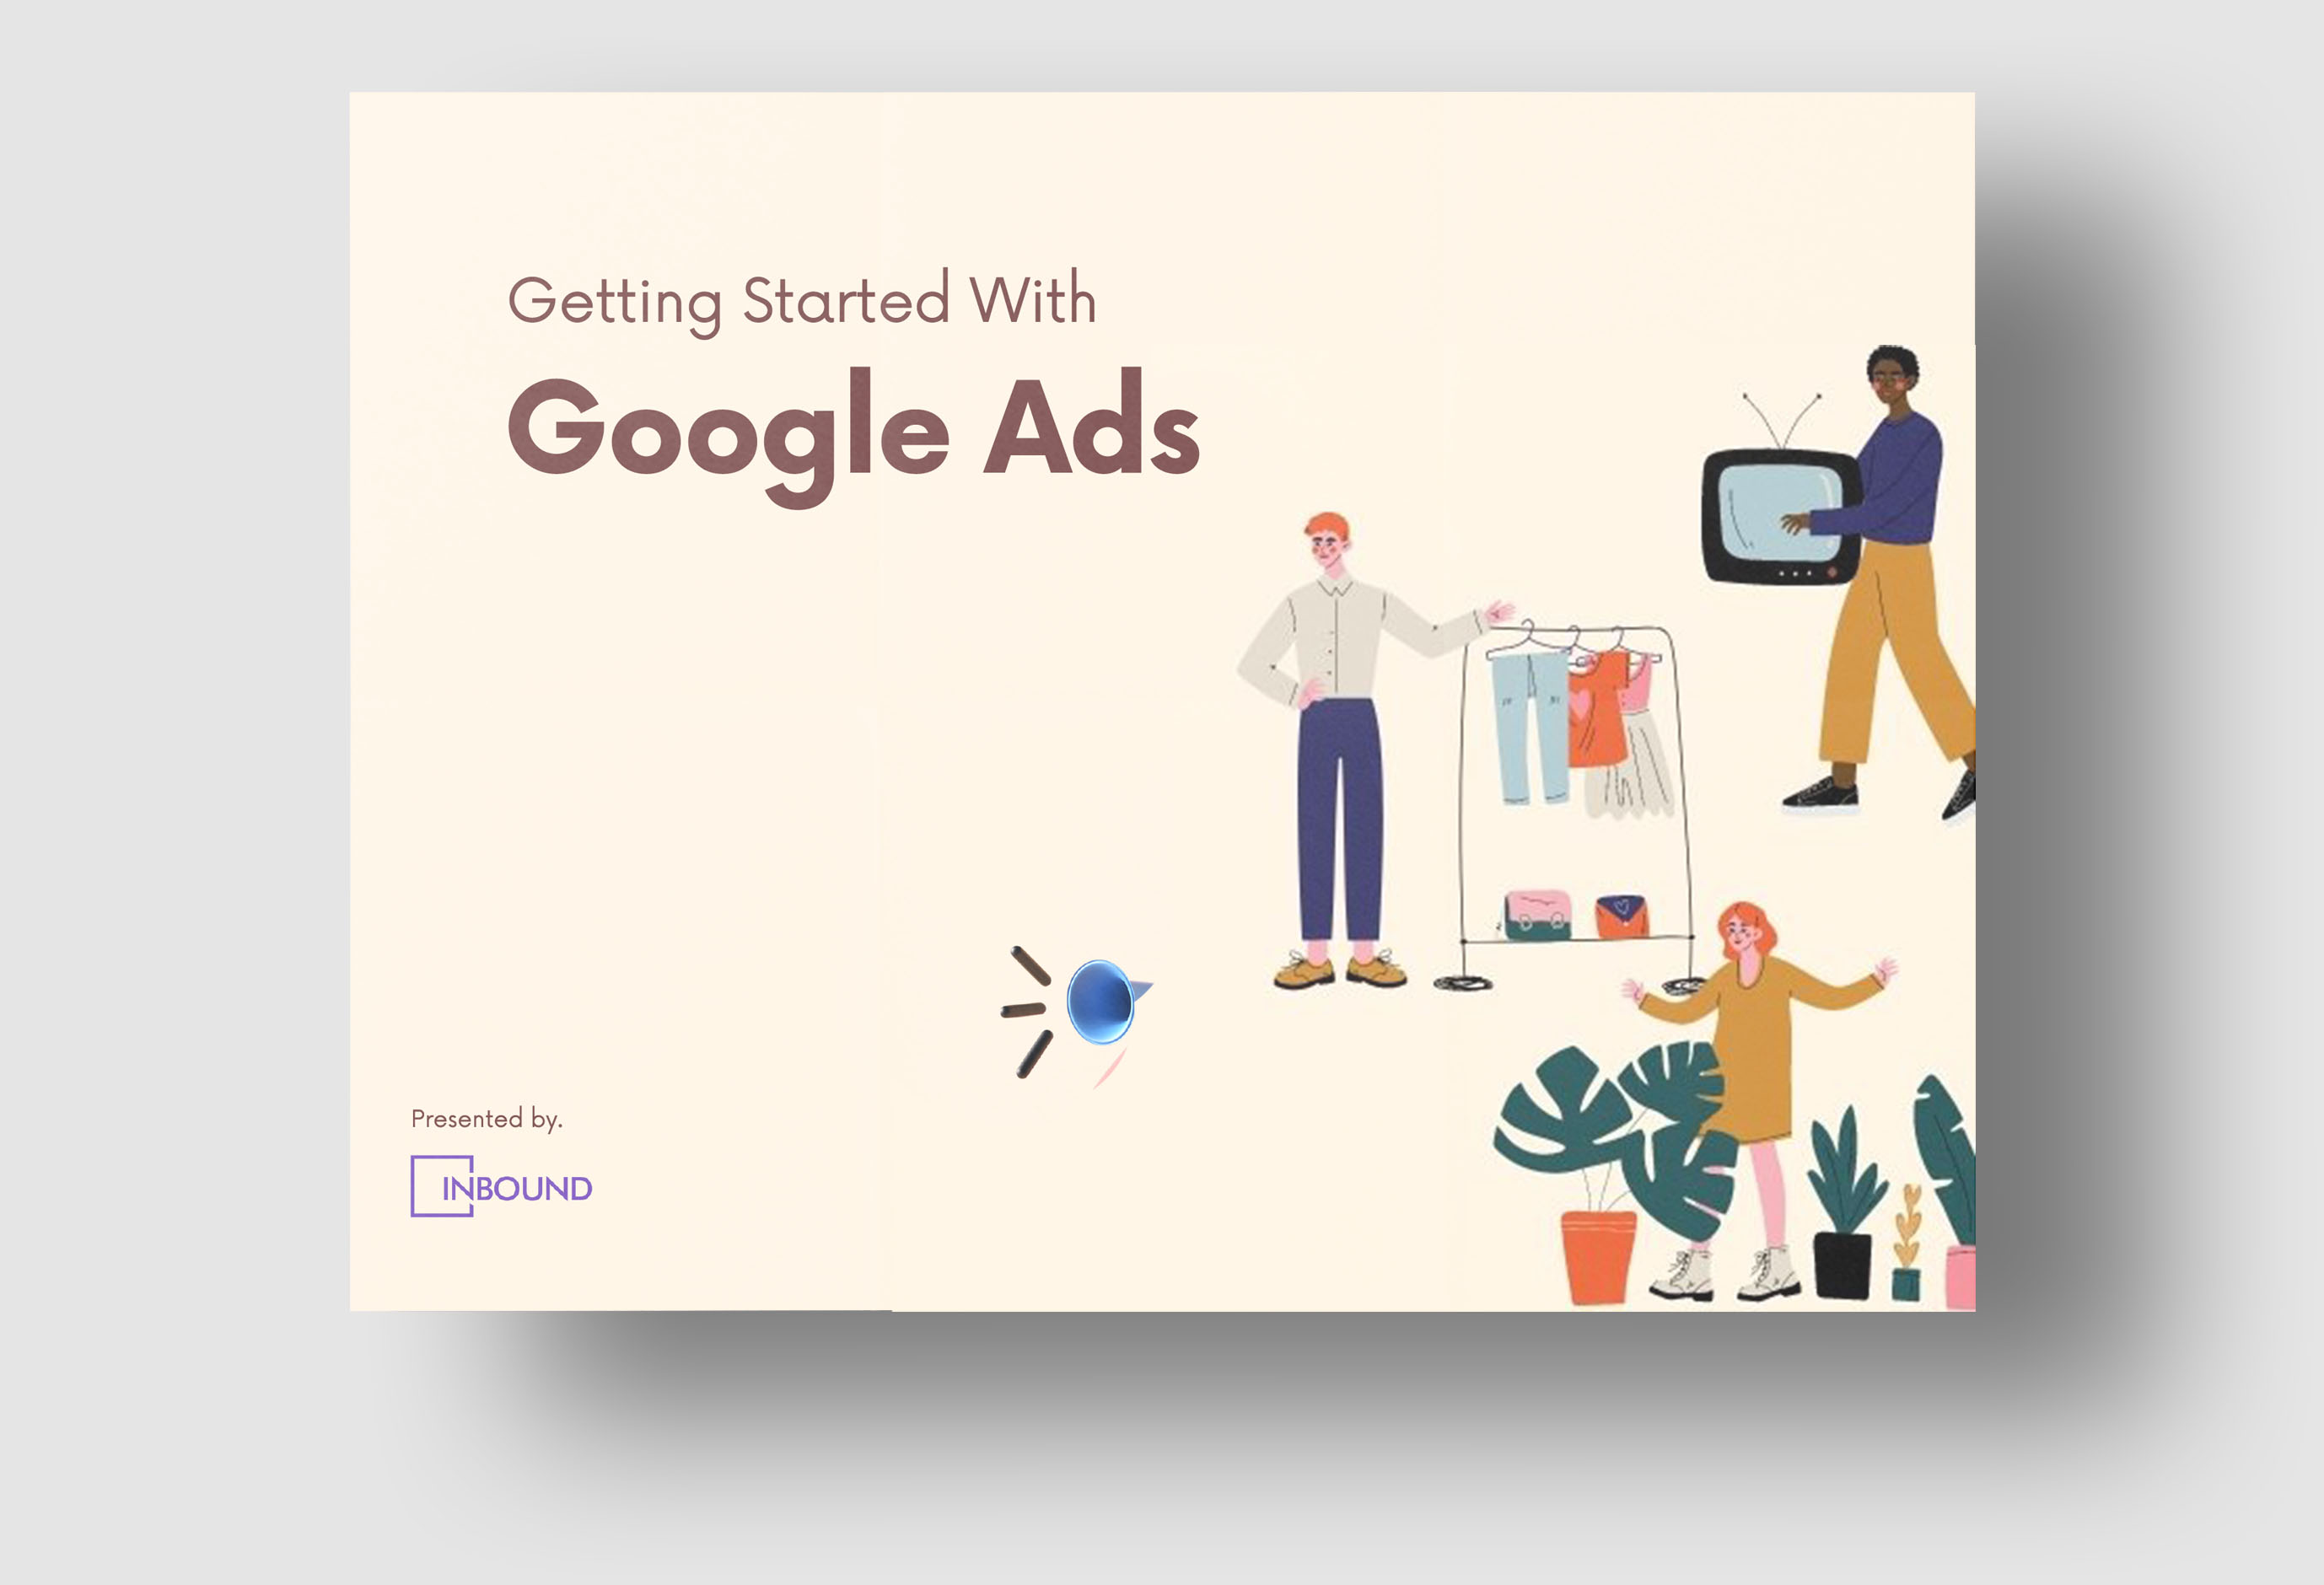 Getting Started With Google Ads